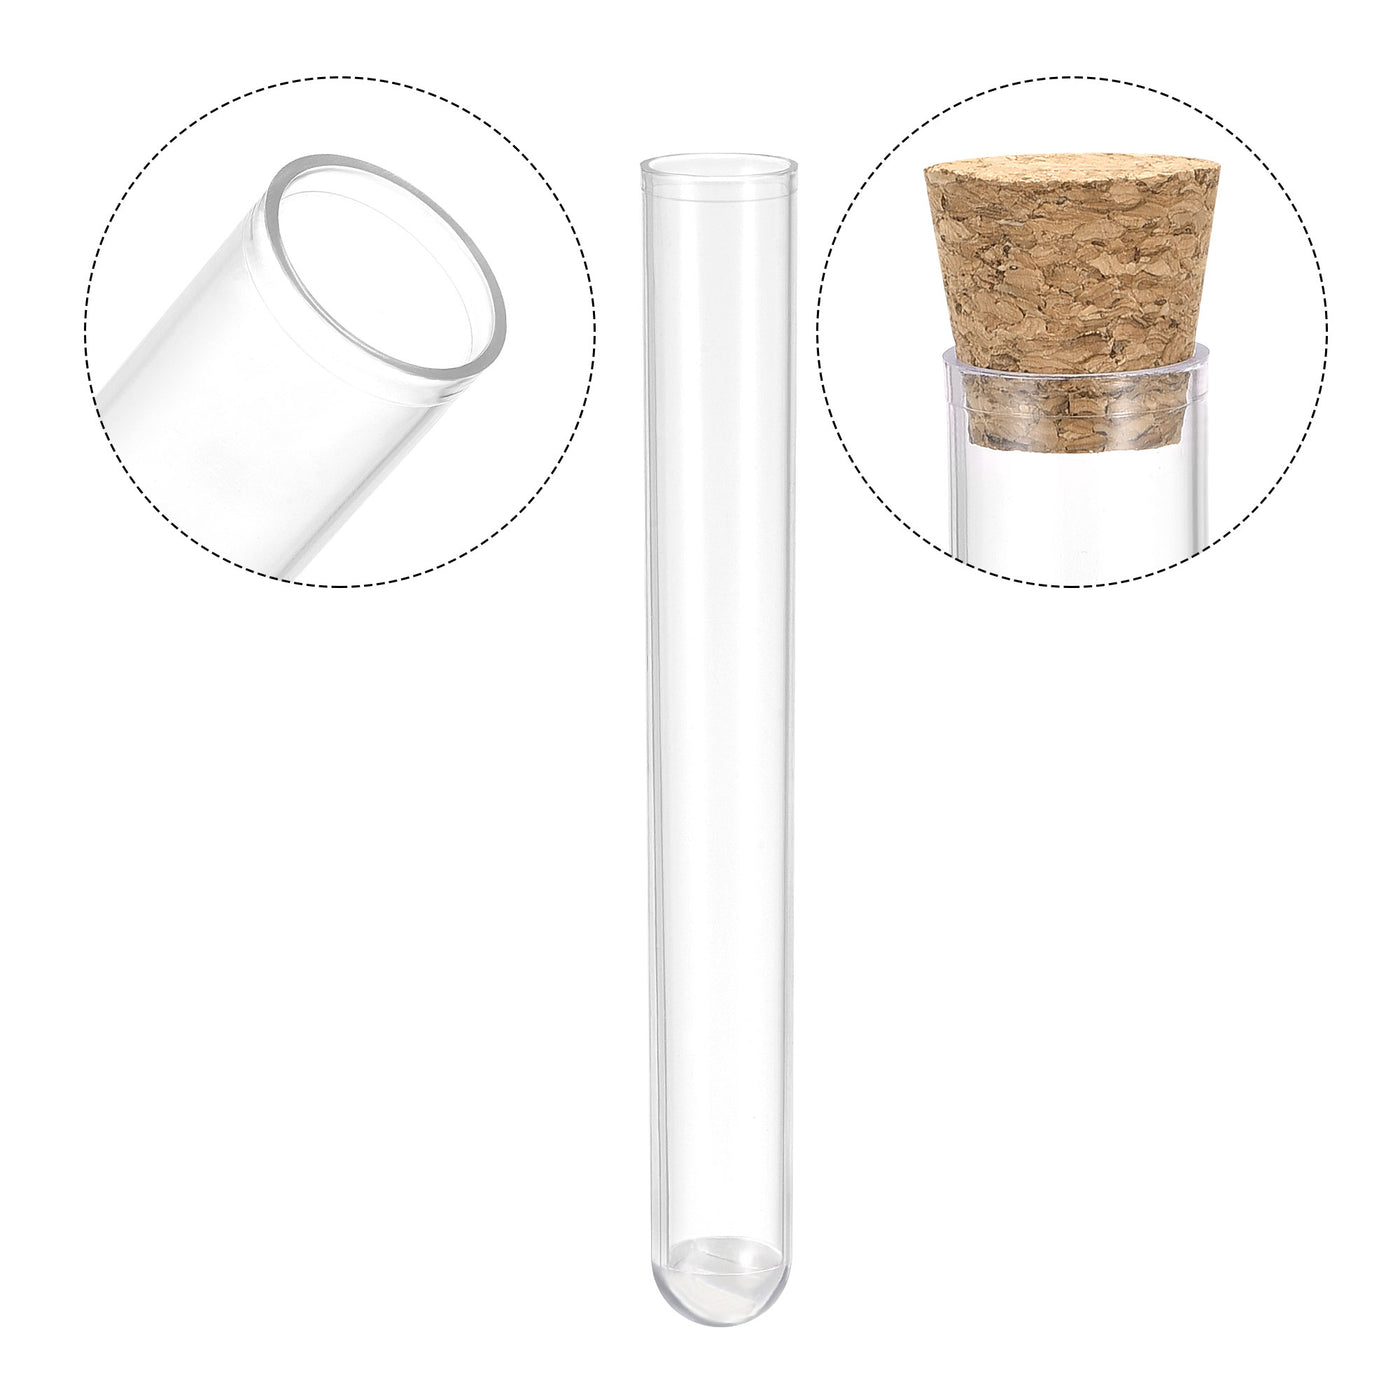 Uxcell Uxcell 30Pcs PS Plastic Test Tubes with Cork Stoppers, Round Base, 12x100mm